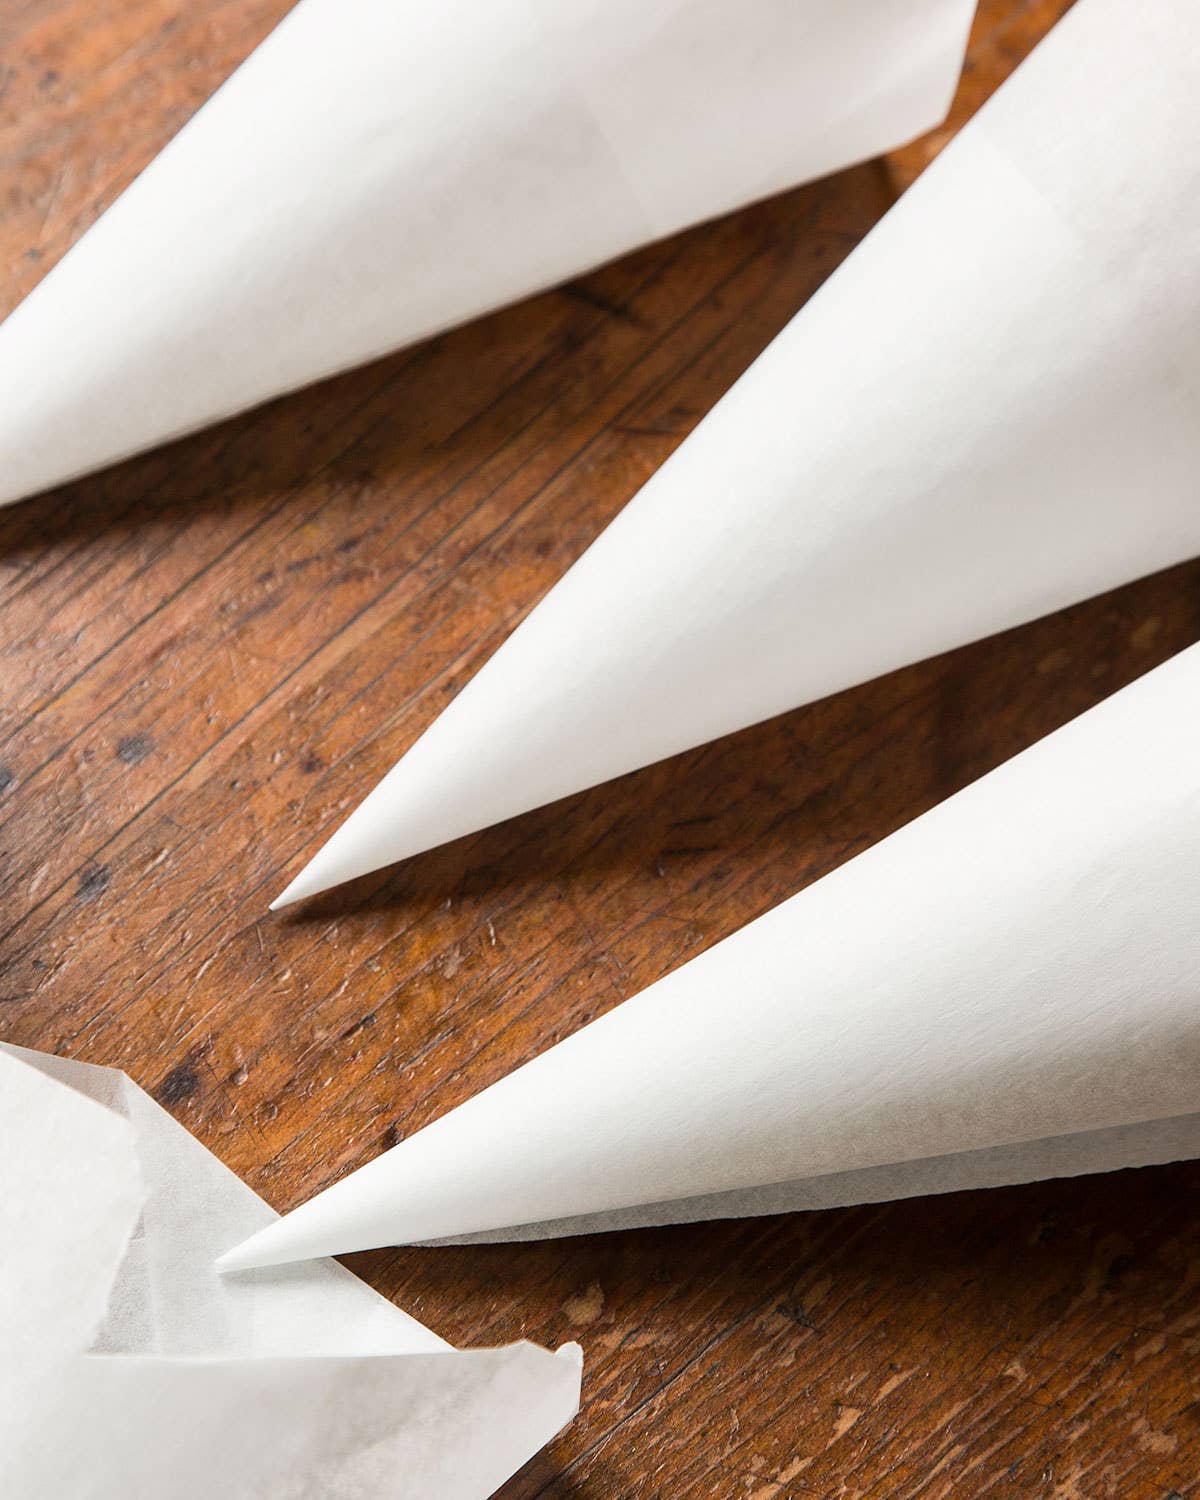 Video: How to Make a Parchment Cone